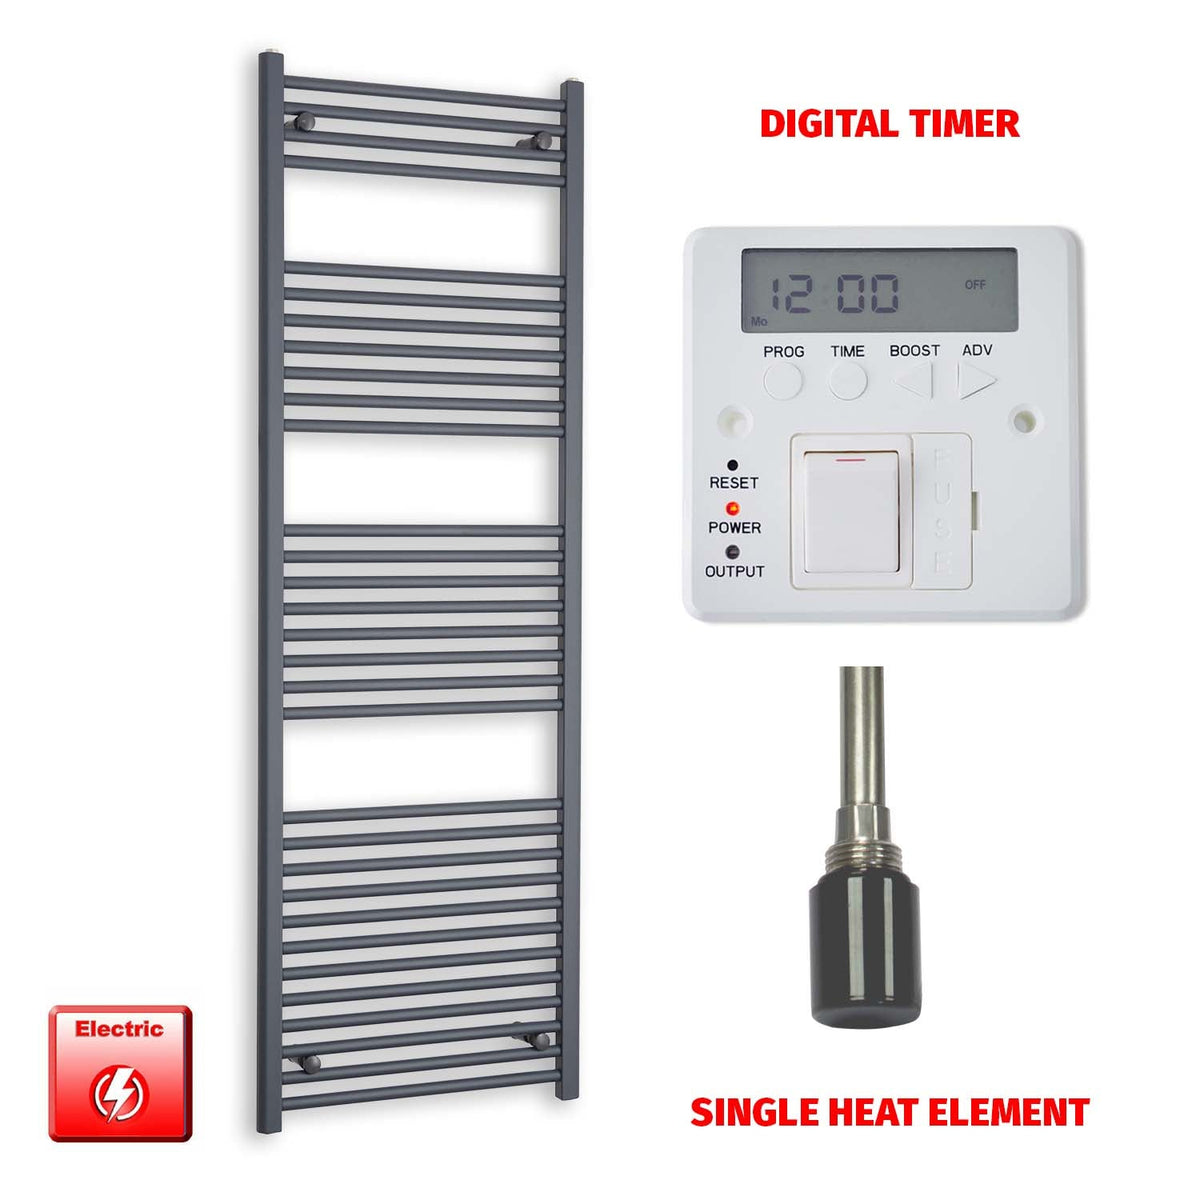 1800mm High 600mm Wide Flat Anthracite Pre-Filled Electric Heated Towel Rail Radiator HTR Single heat element Digital timer